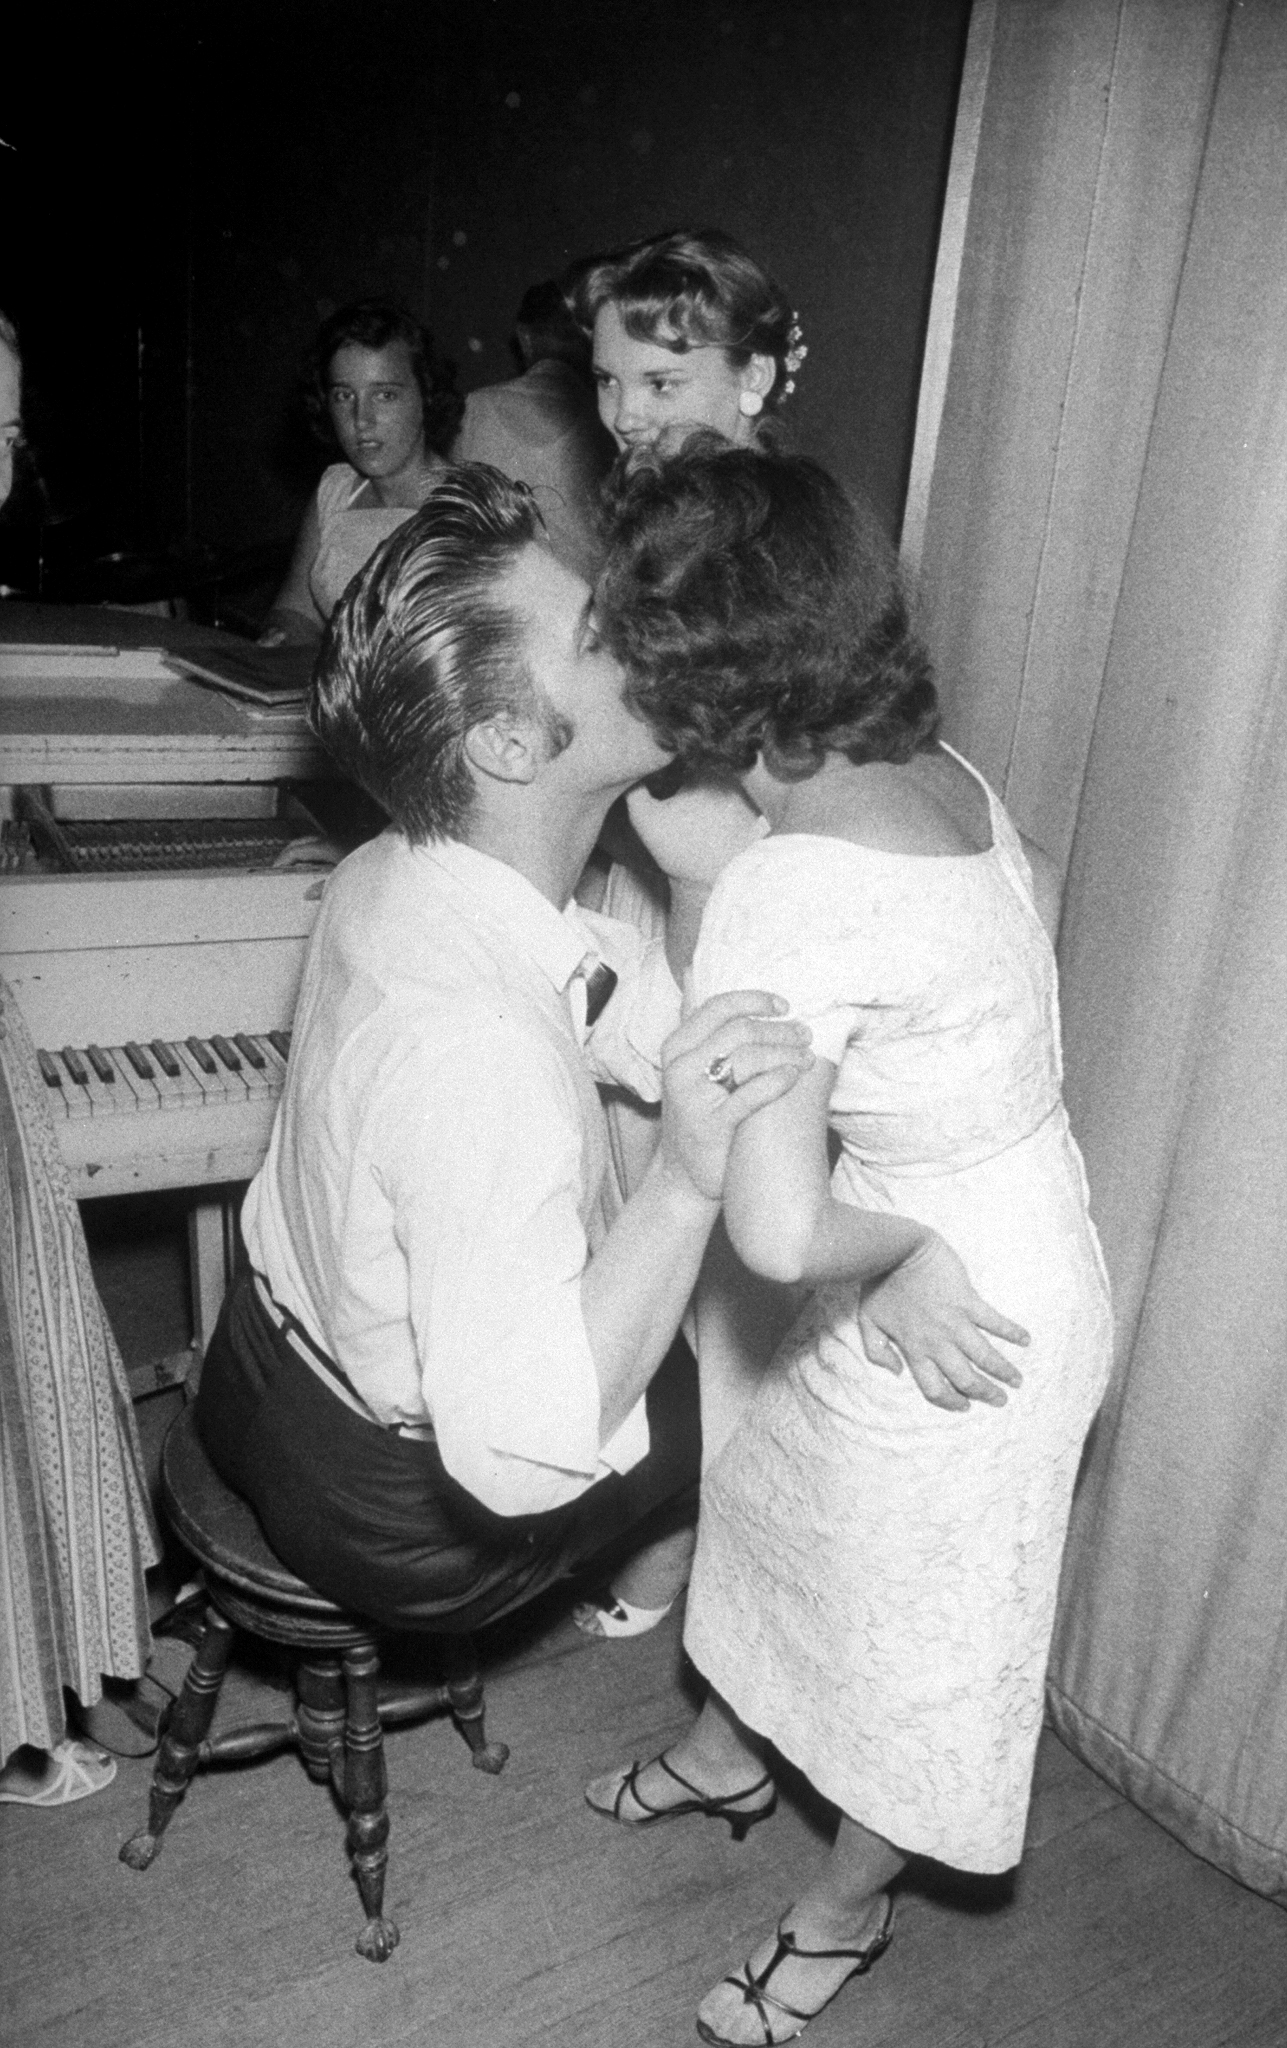 Elvis Presley tenderly embracing and kissing the cheek of a female admirer backstage before his concert, 1956.